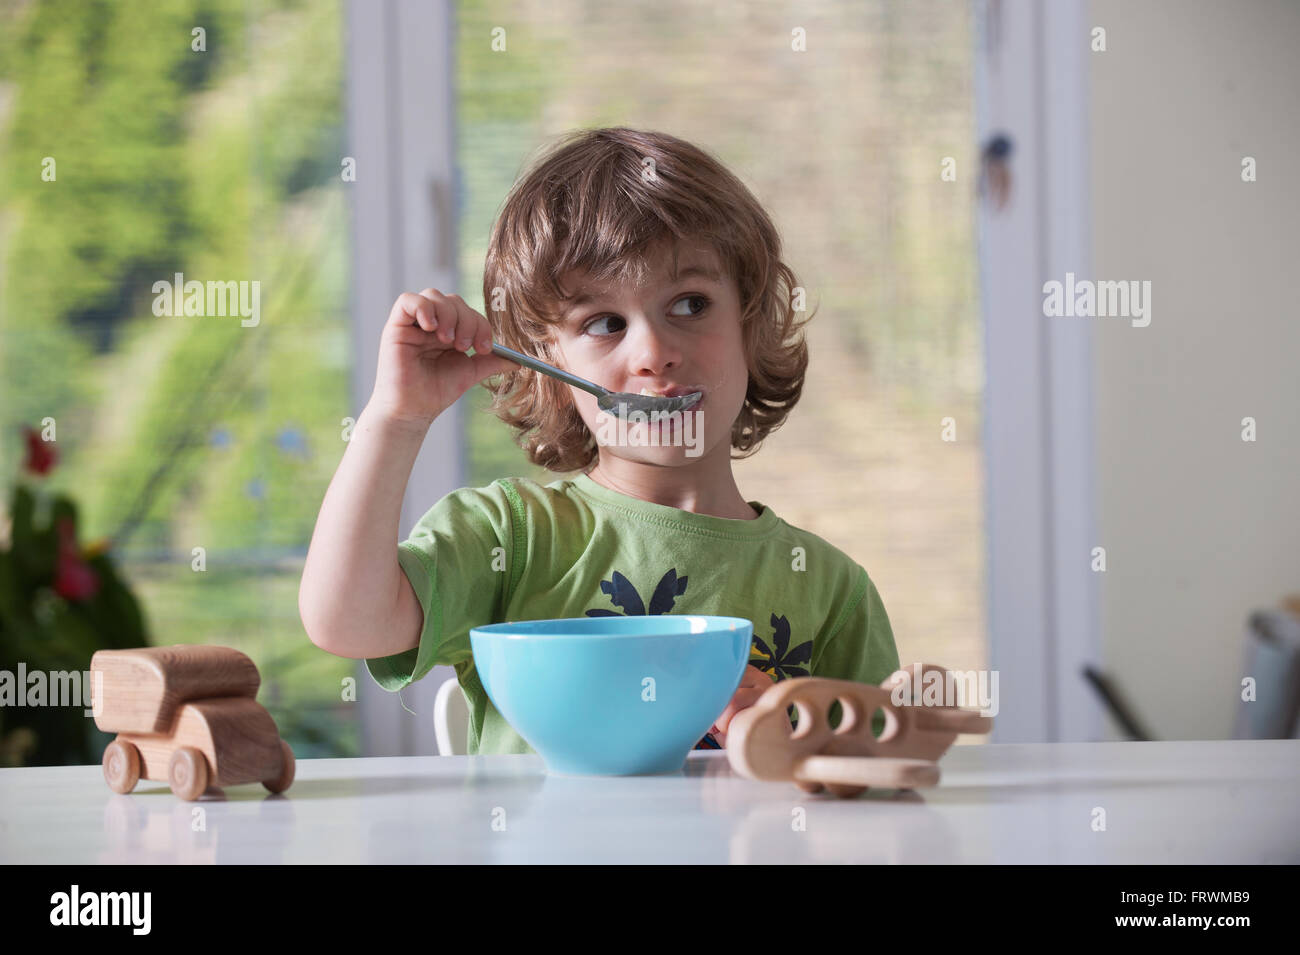 Cute little boy eating his meal while playing with toys Stock Photo